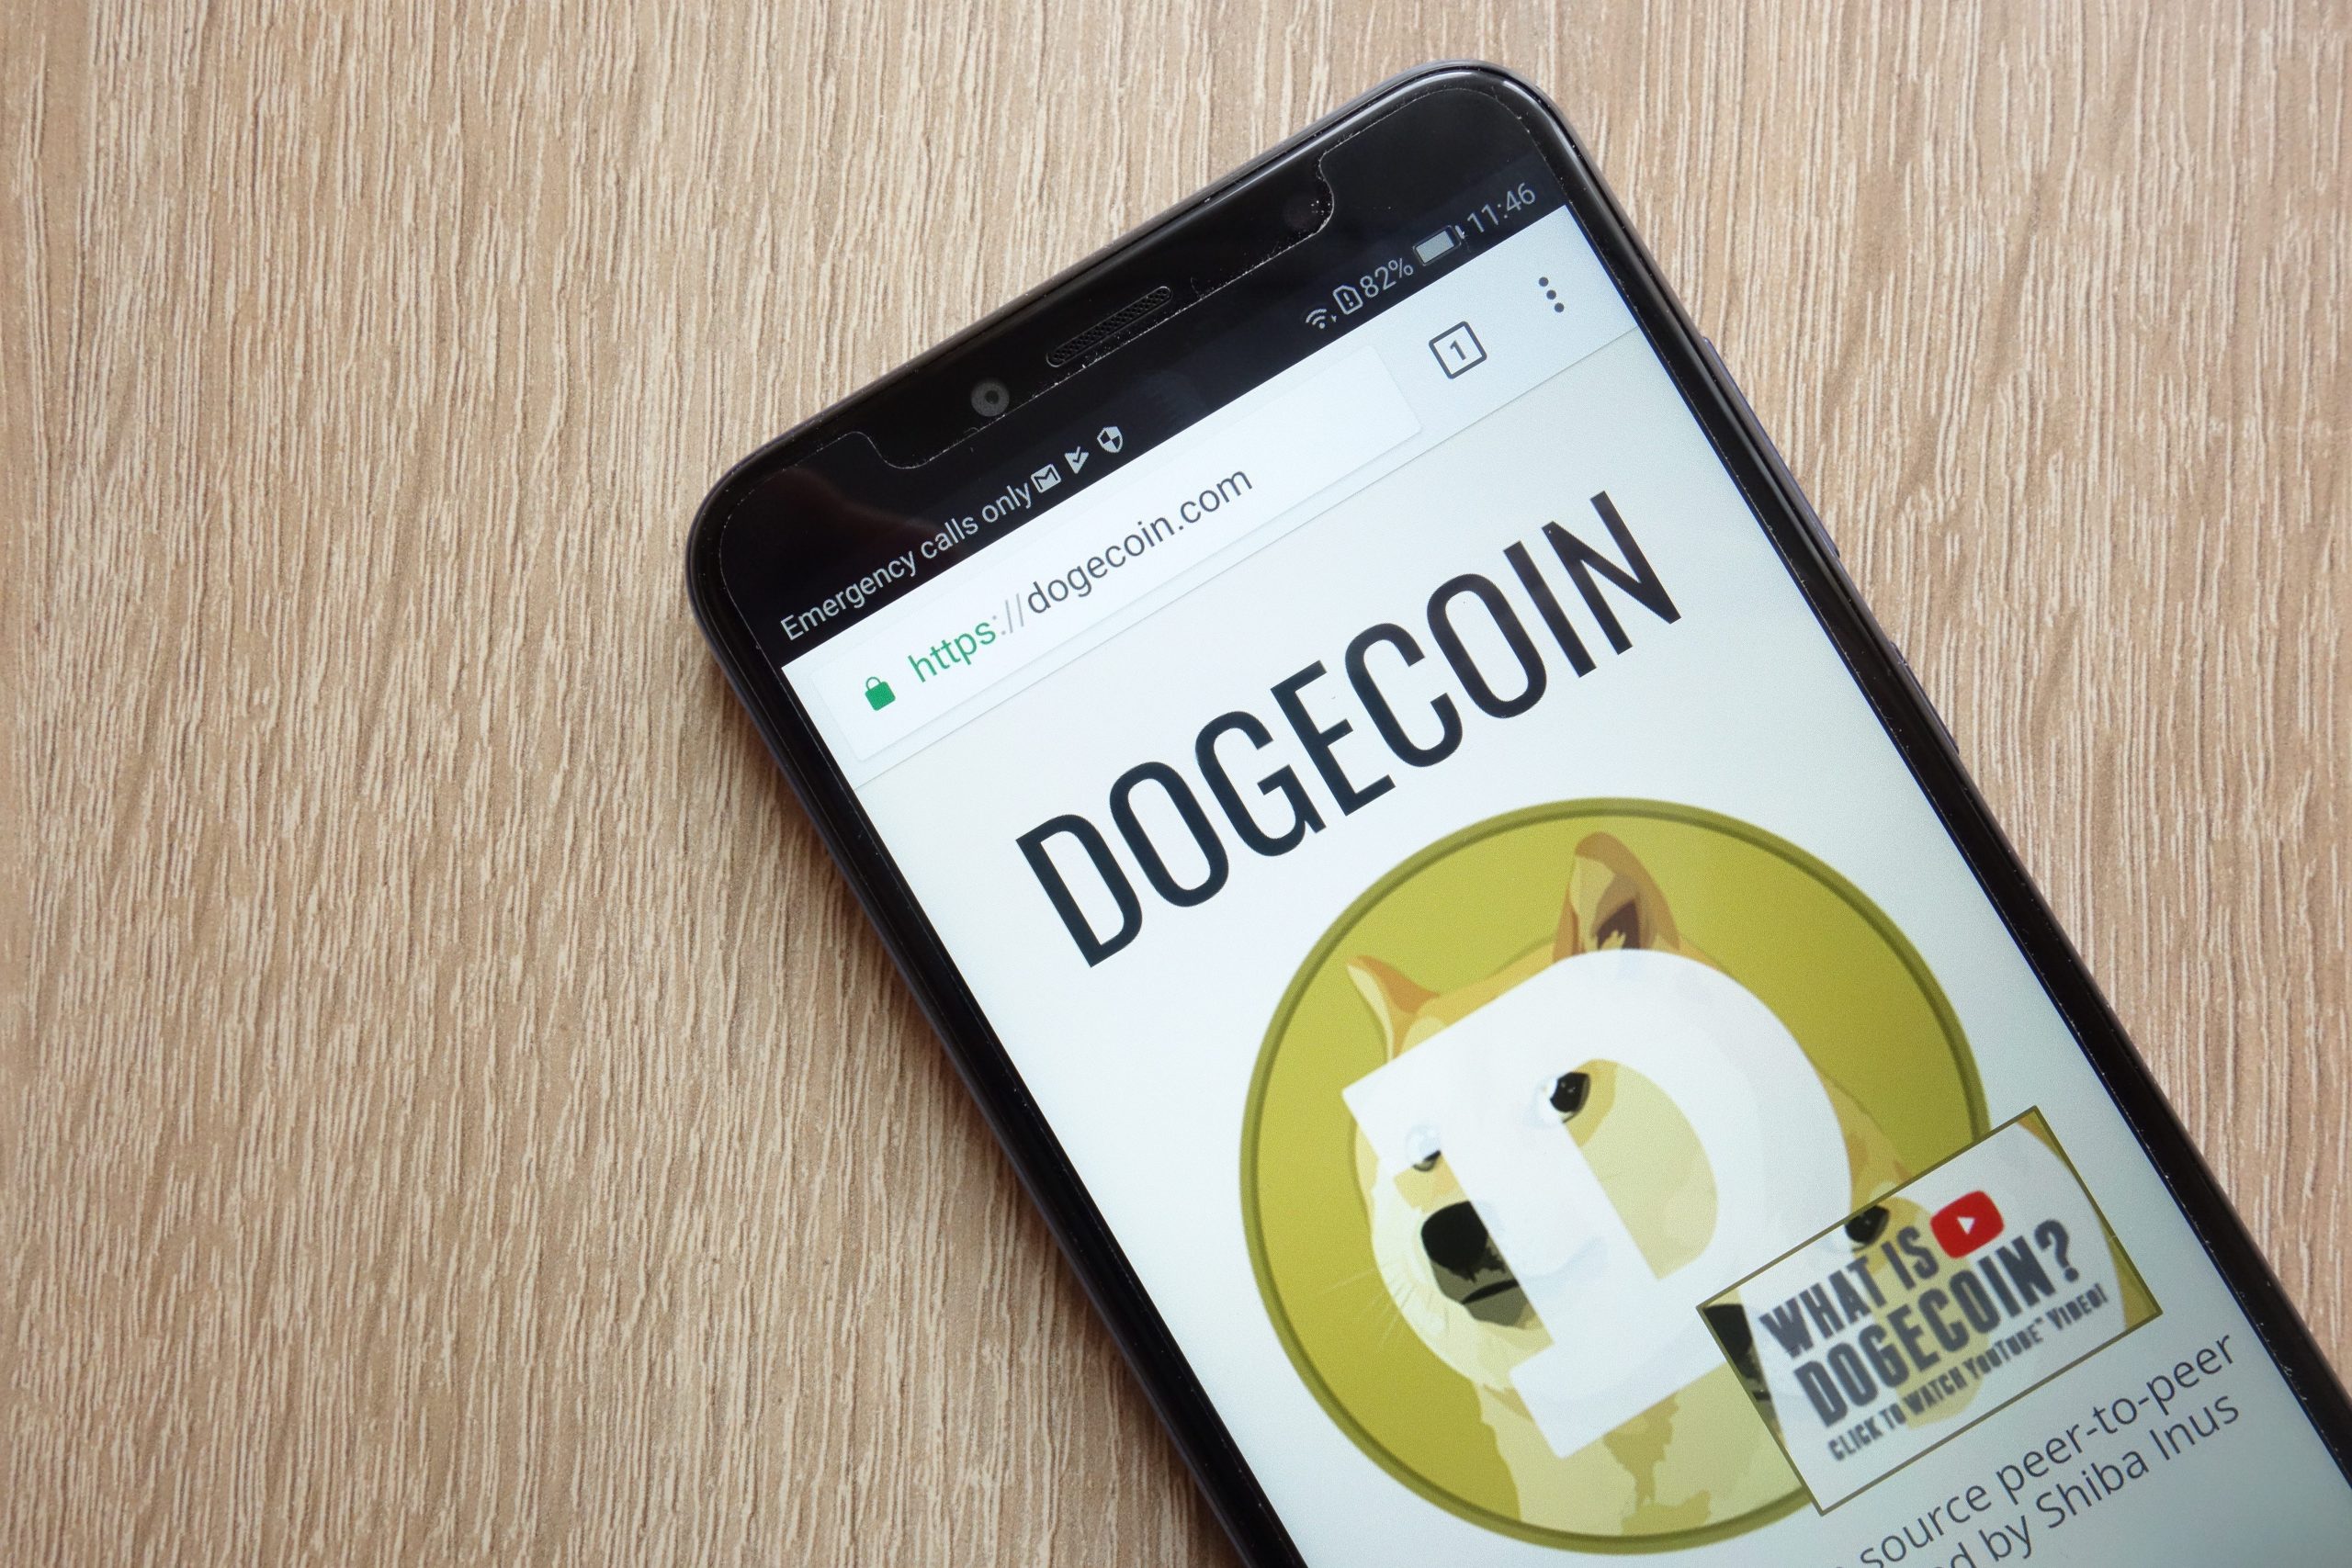 Dogecoin icon on the phone